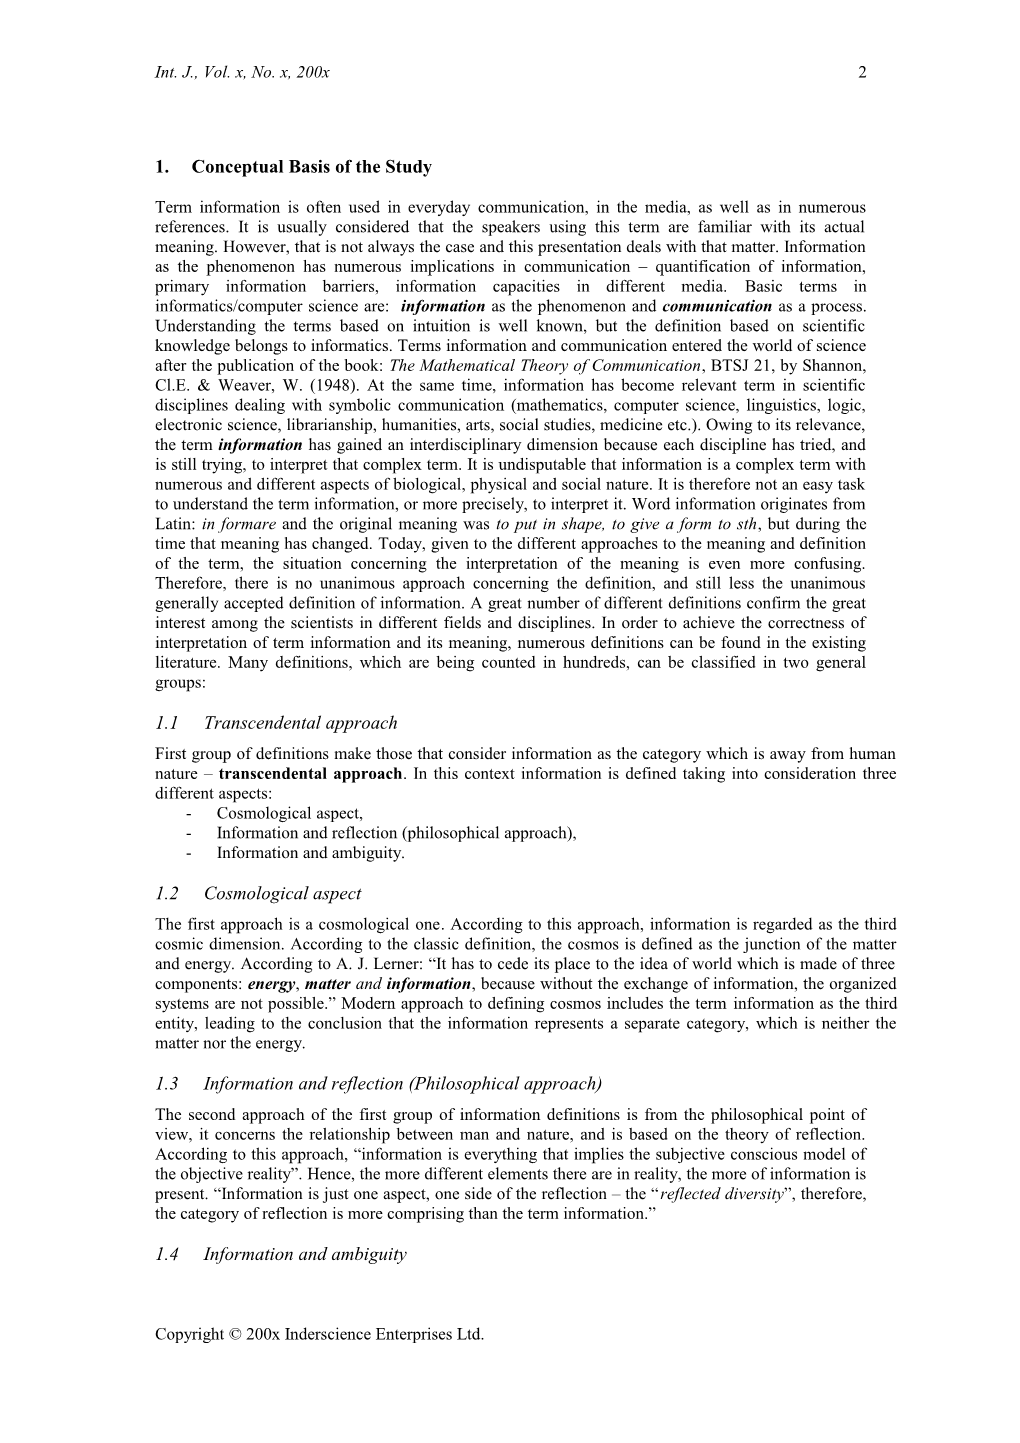 Camera-Ready Manuscript for the Proceedings of Icame 2009